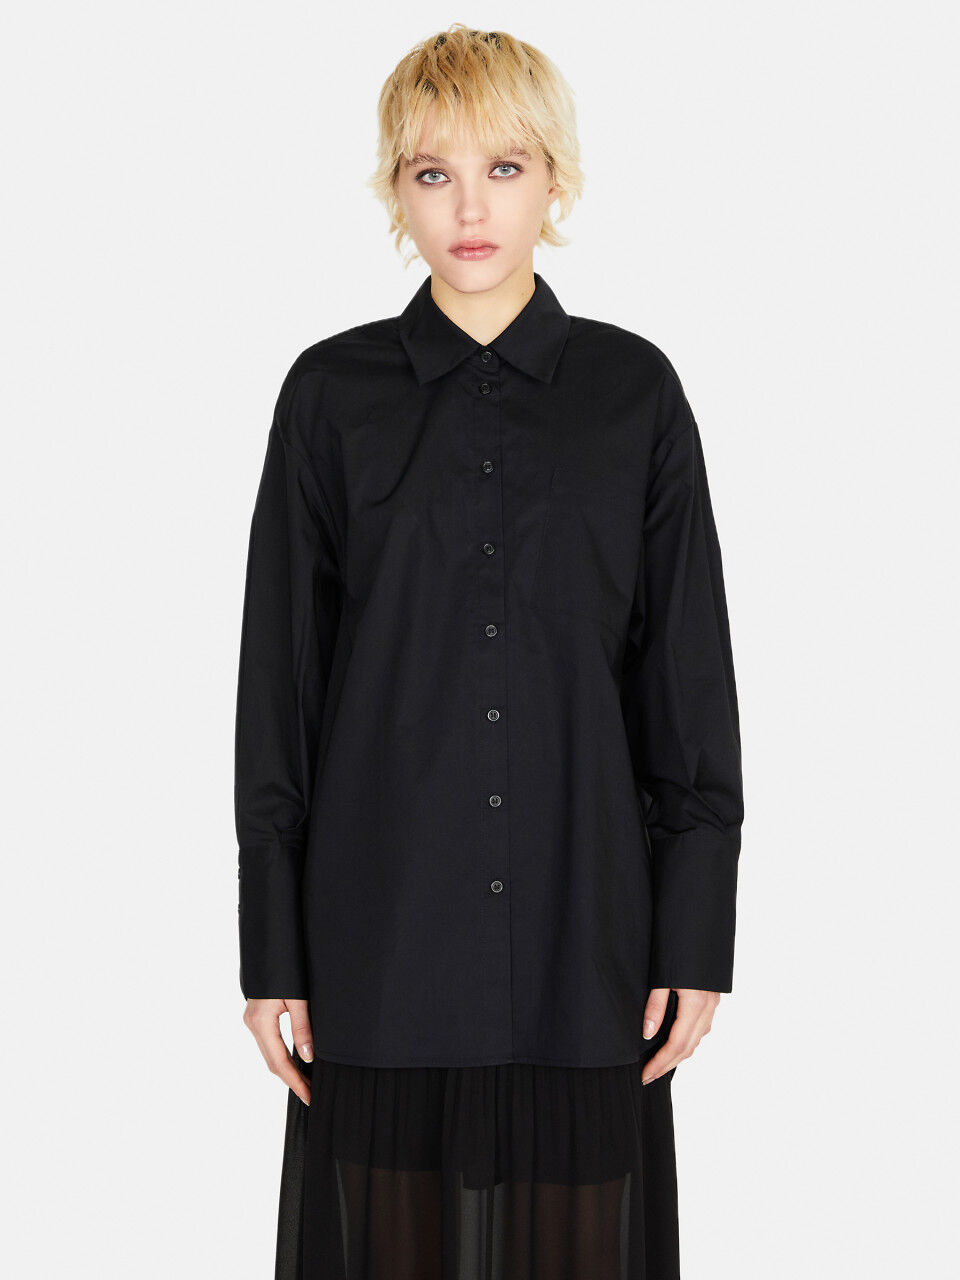 Oversized fit shirt in 100% cotton